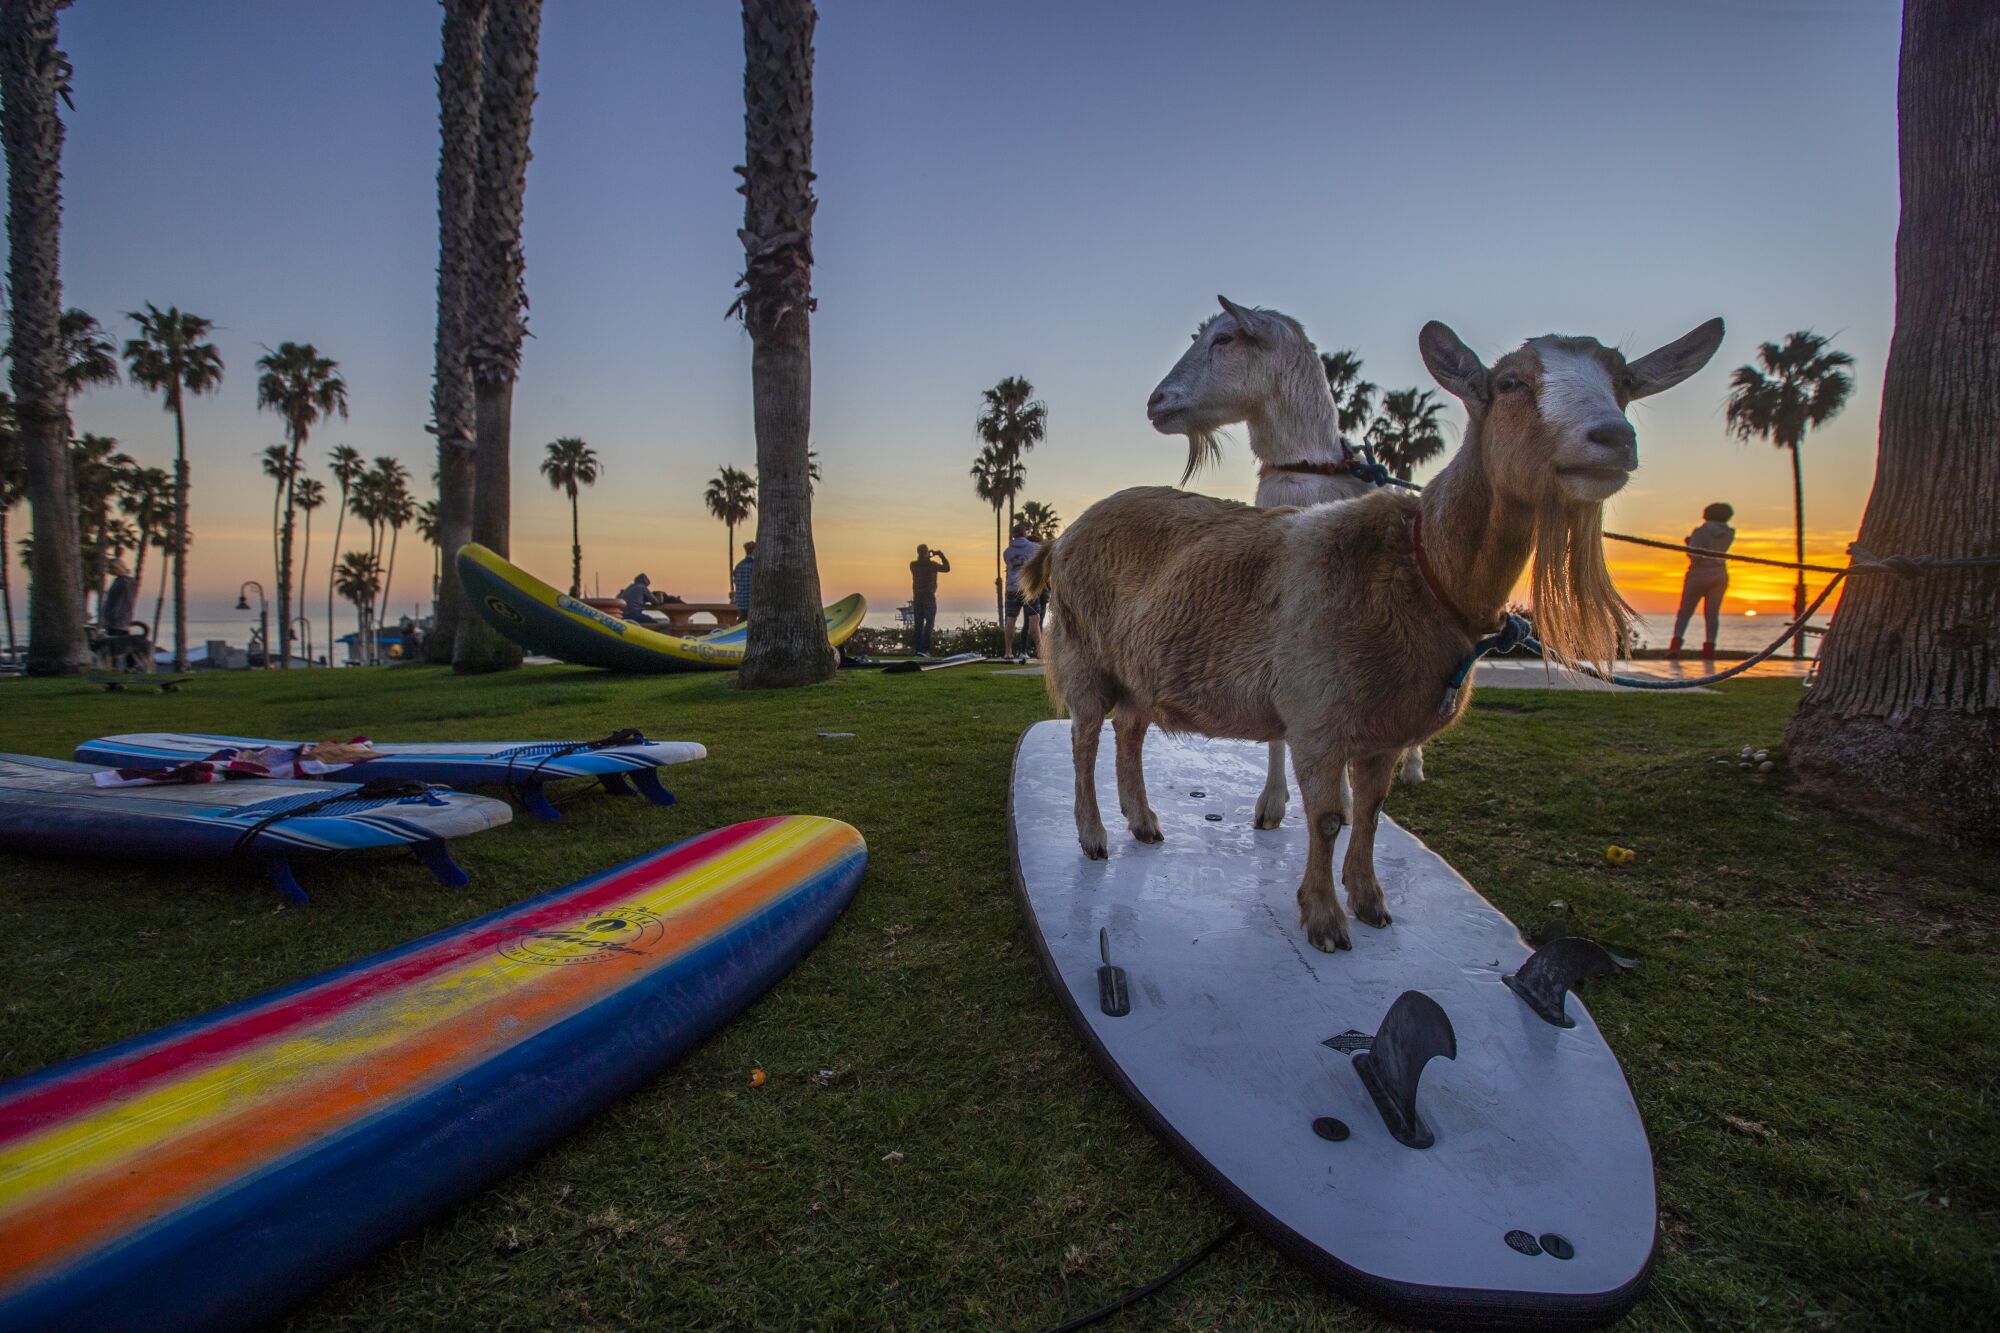  Surfing goats Grover, front, and Pismo the Kid